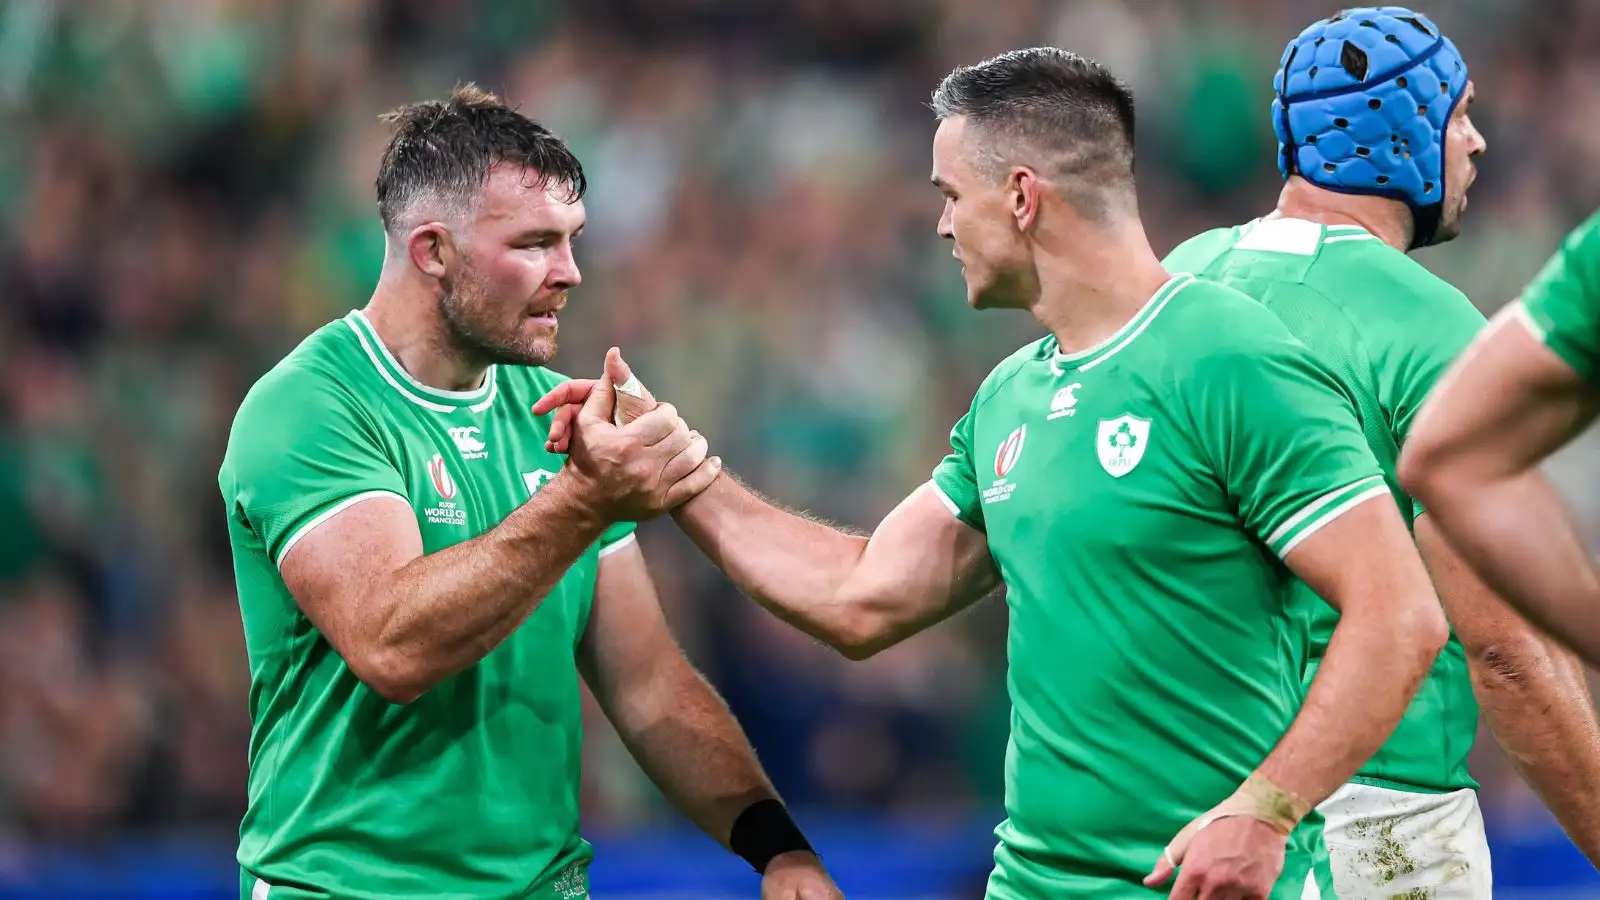 Johnny Sexton and Peter O'Mahony during the World Cup match between South Africa (Springboks) and Ireland on September 23, 2023 at Stade de France.